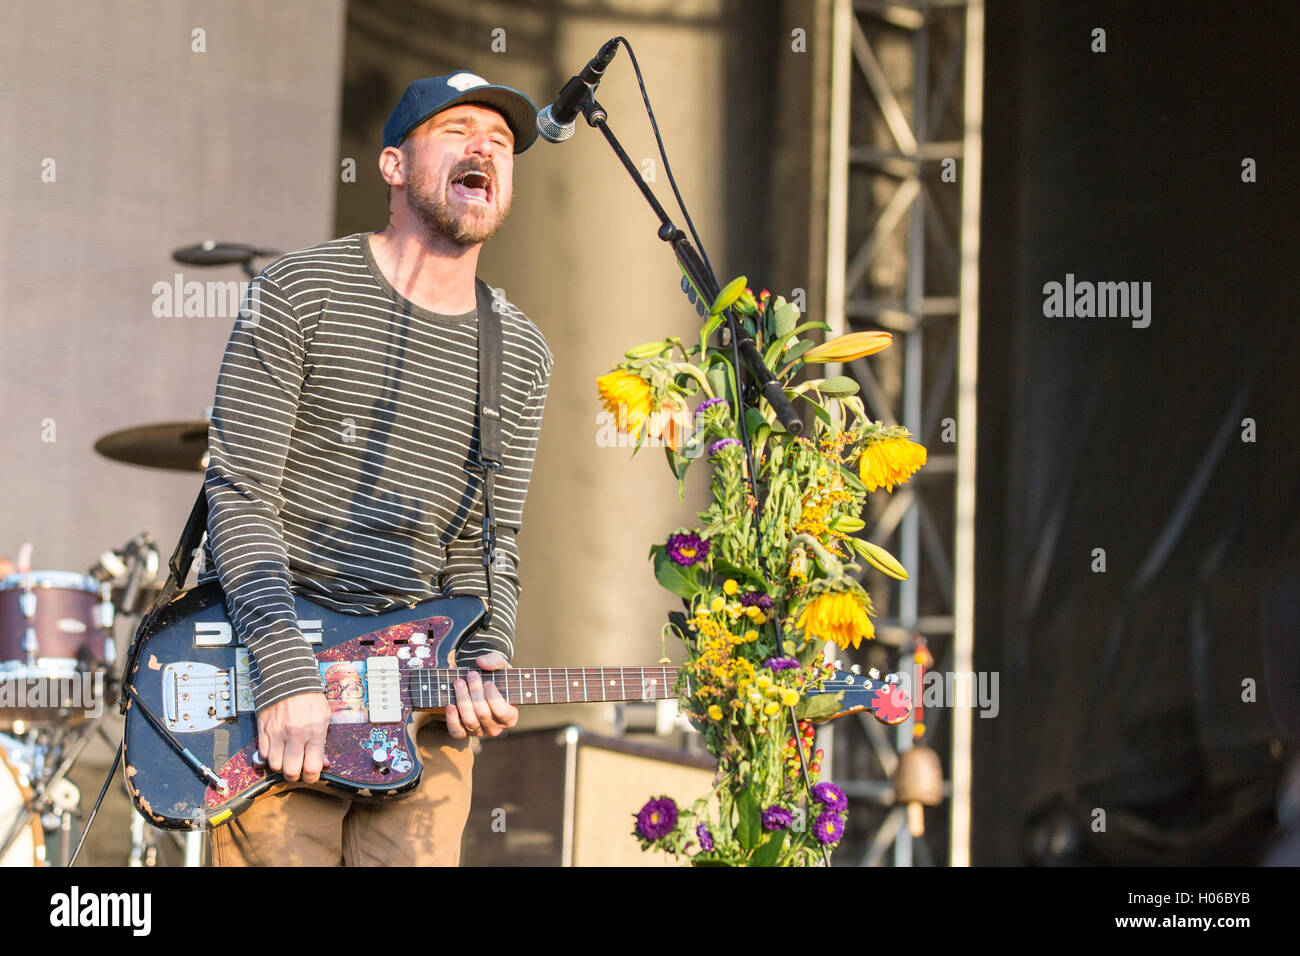 https://c8.alamy.com/comp/H06BYB/chicago-illinois-usa-17th-sep-2016-jesse-lacey-of-brand-new-performs-H06BYB.jpg